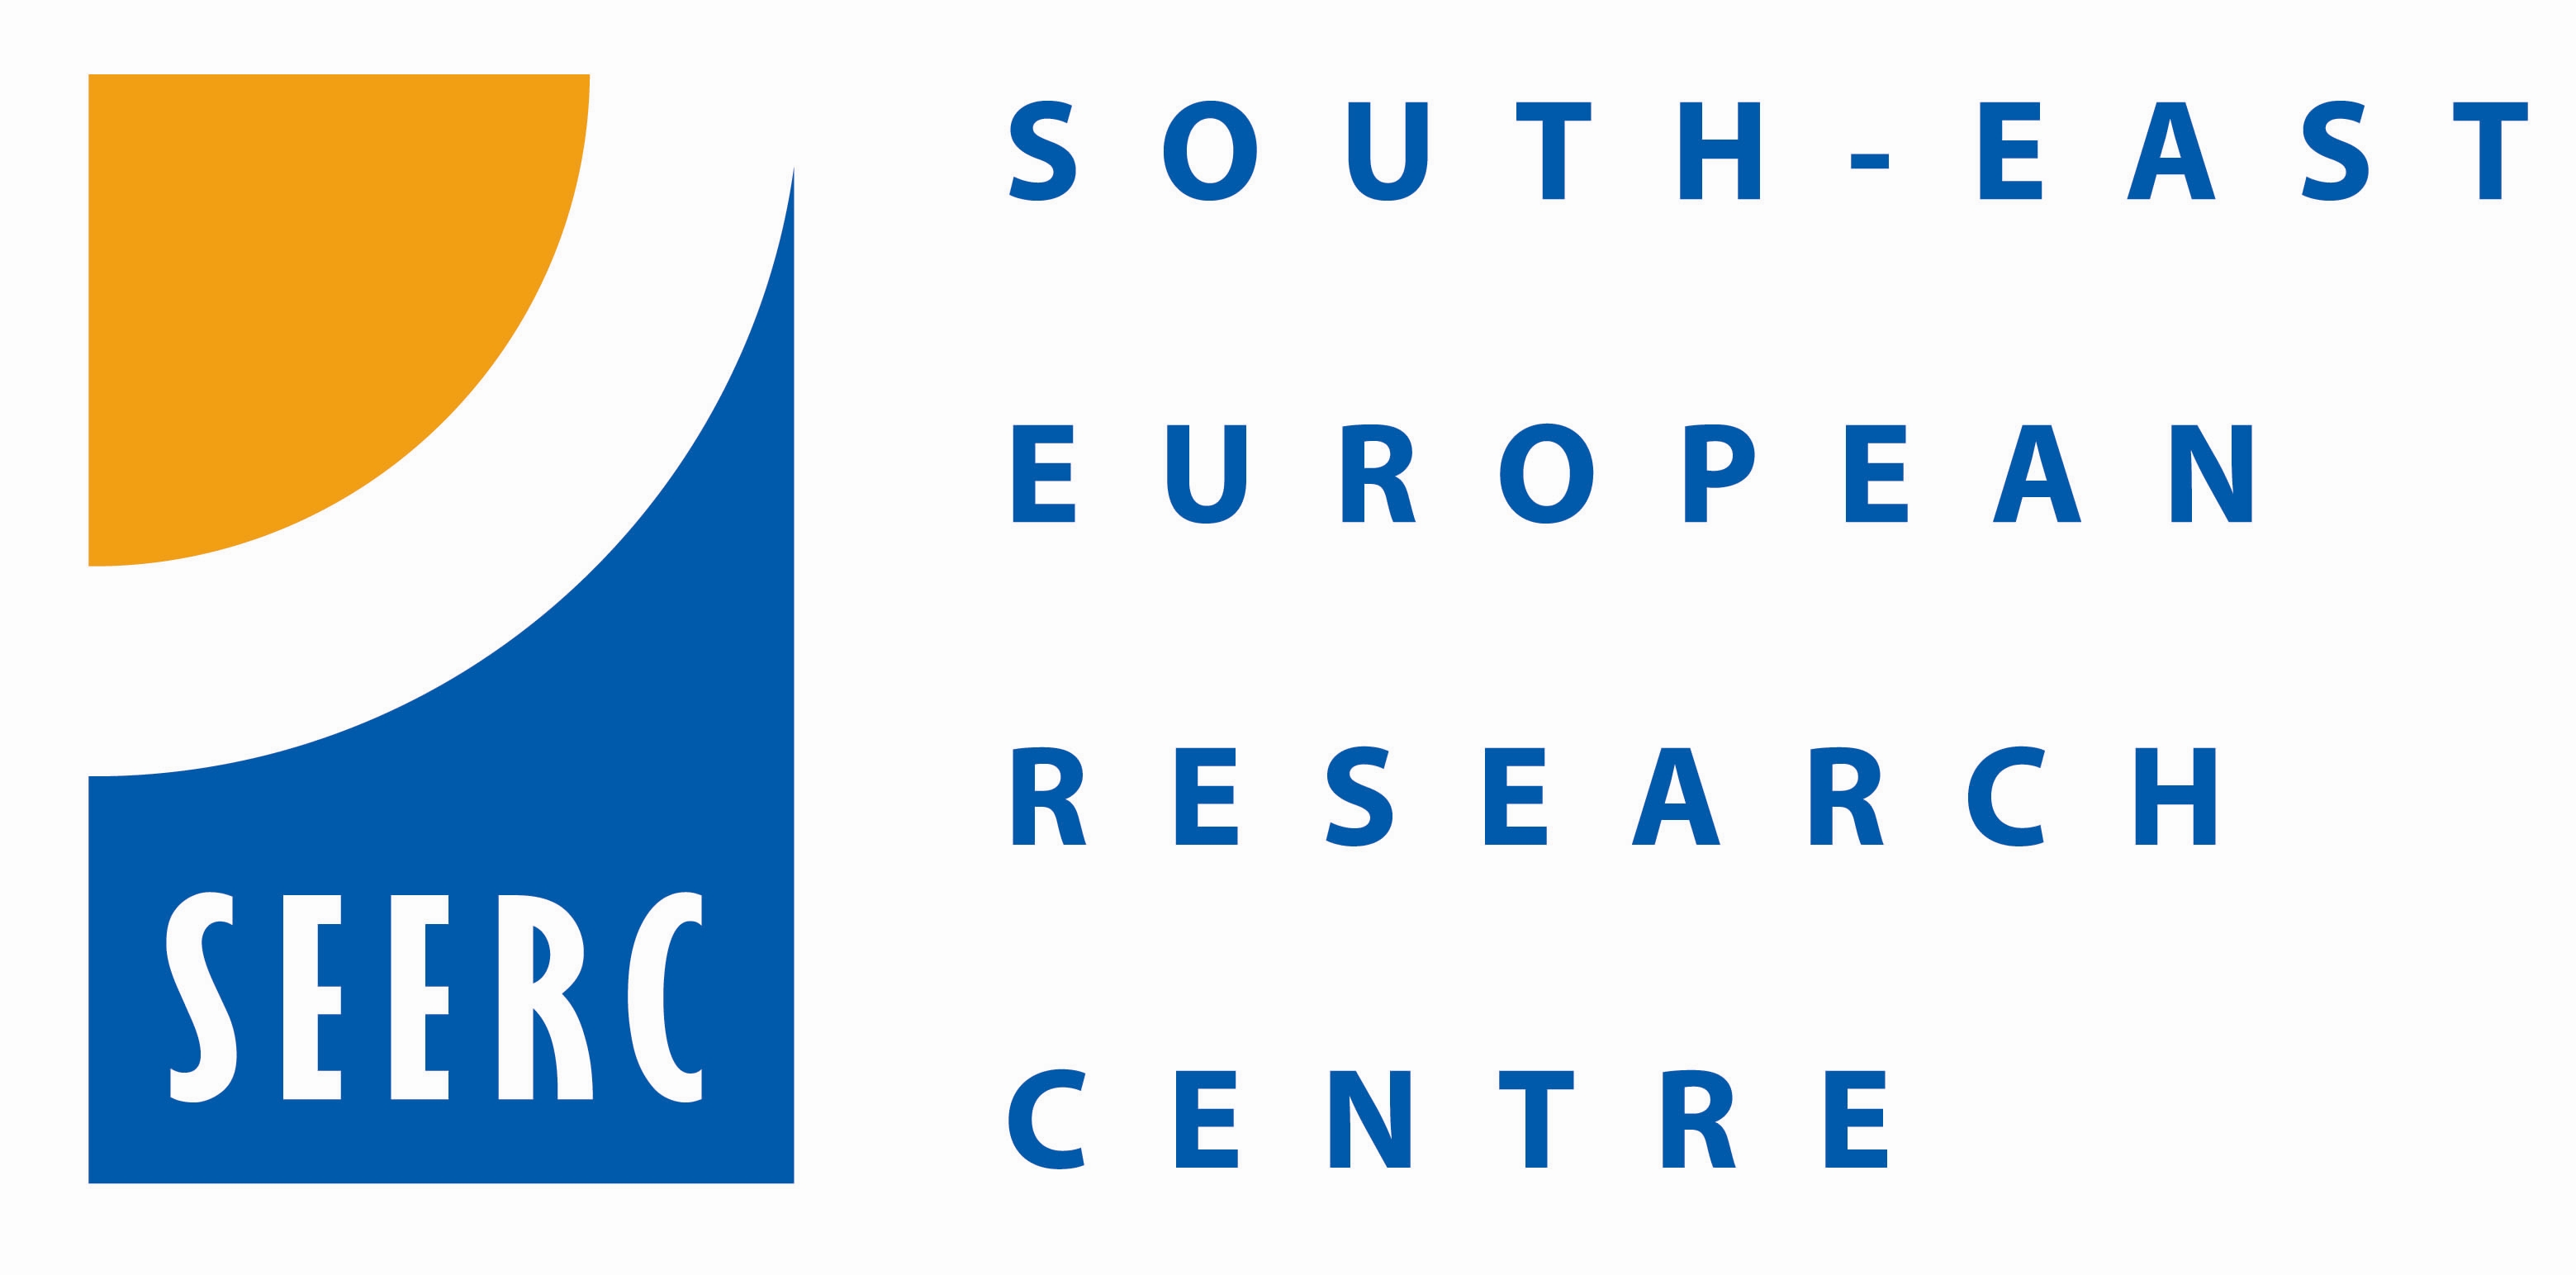 The South East European Research Centre (SEERC) seeks candidates for the following position: Business Development Manager (BDM/2019)